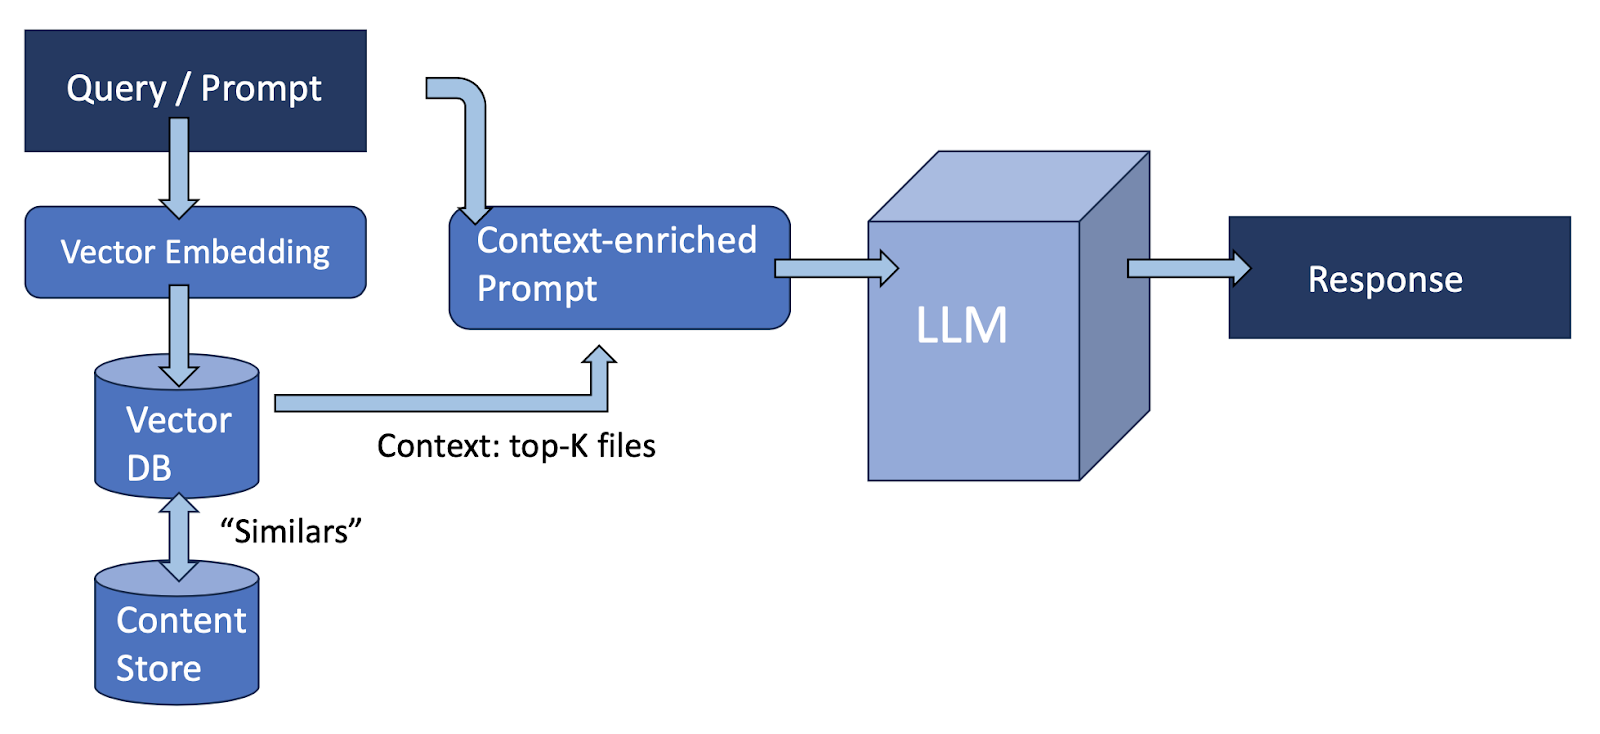 A diagram of a software processing process

Description automatically generated